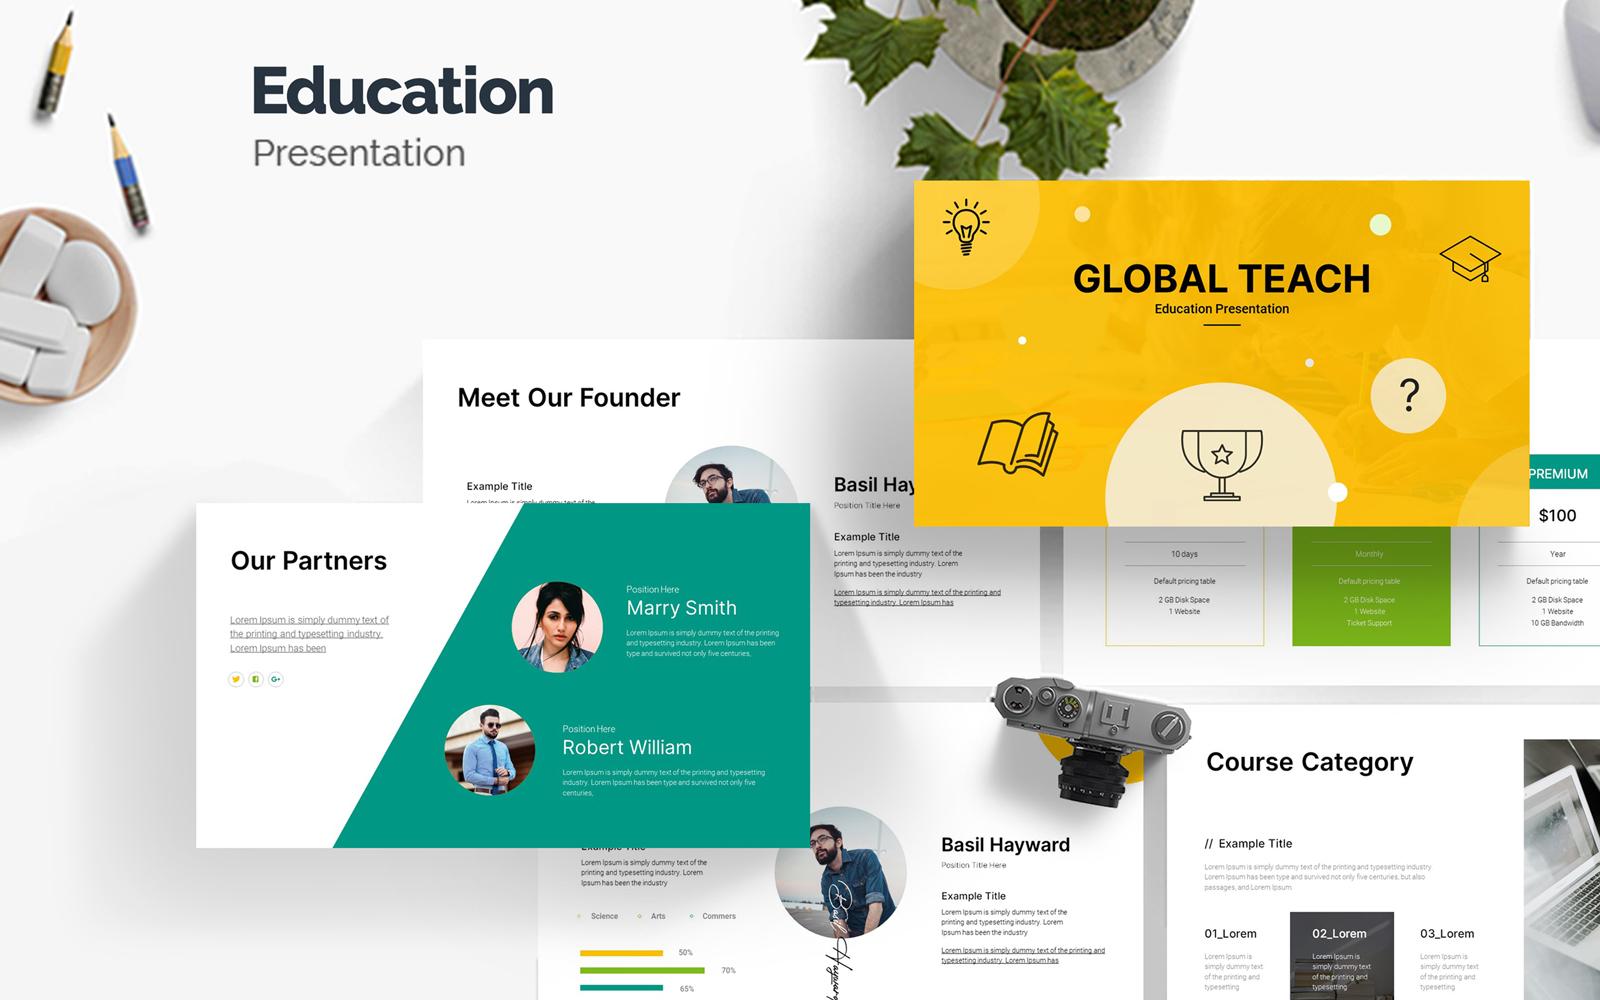 Global Touch Education Presentation